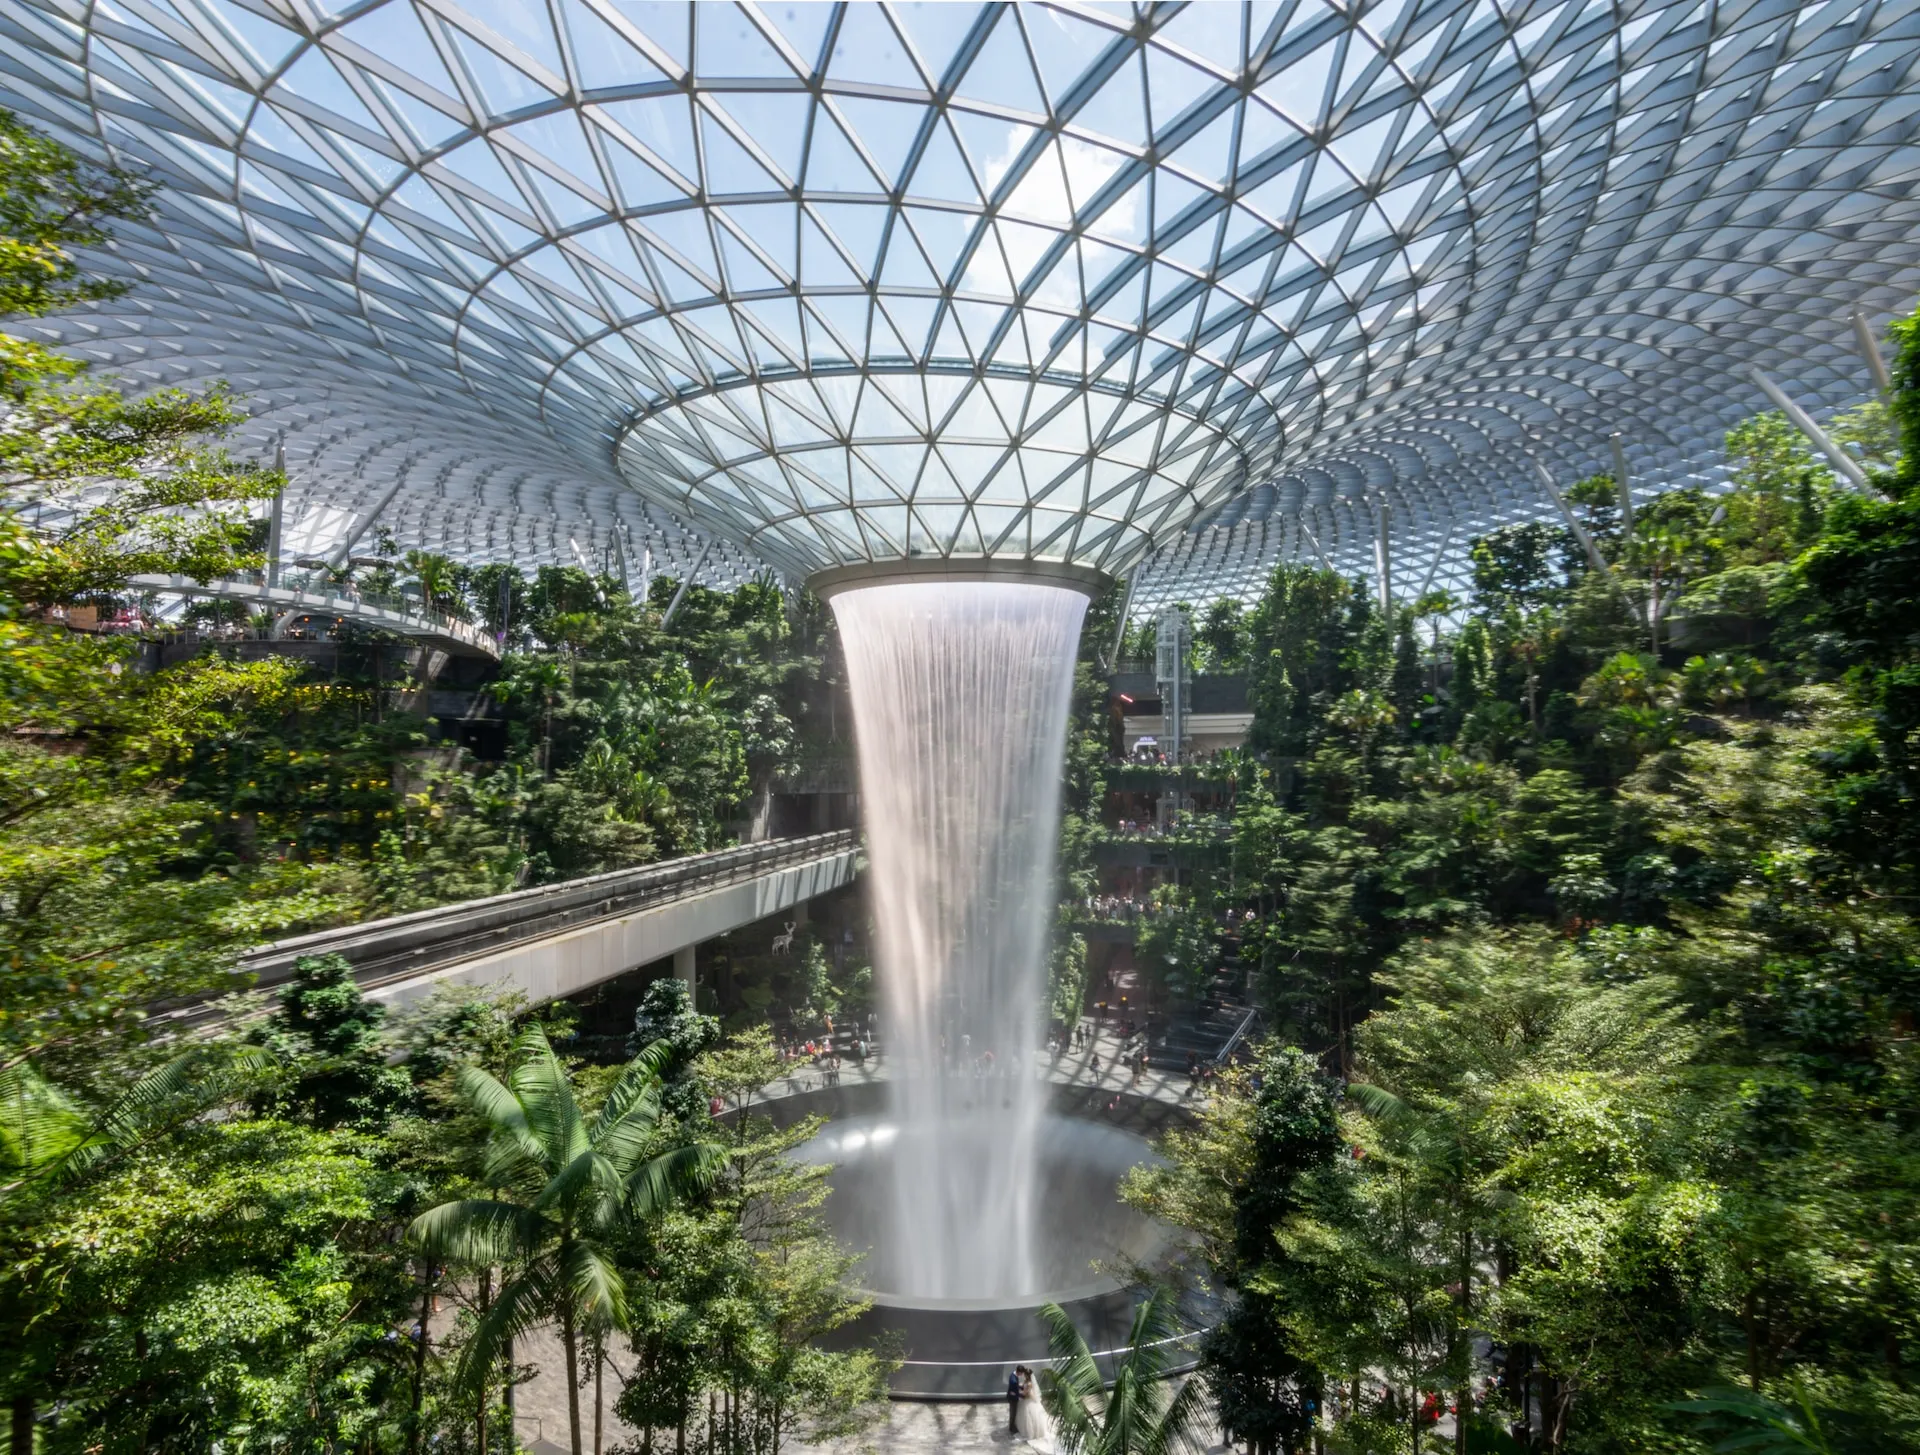 Changi Airport, Singapore. Source: Photo by Maikel Oosterink on Unsplash